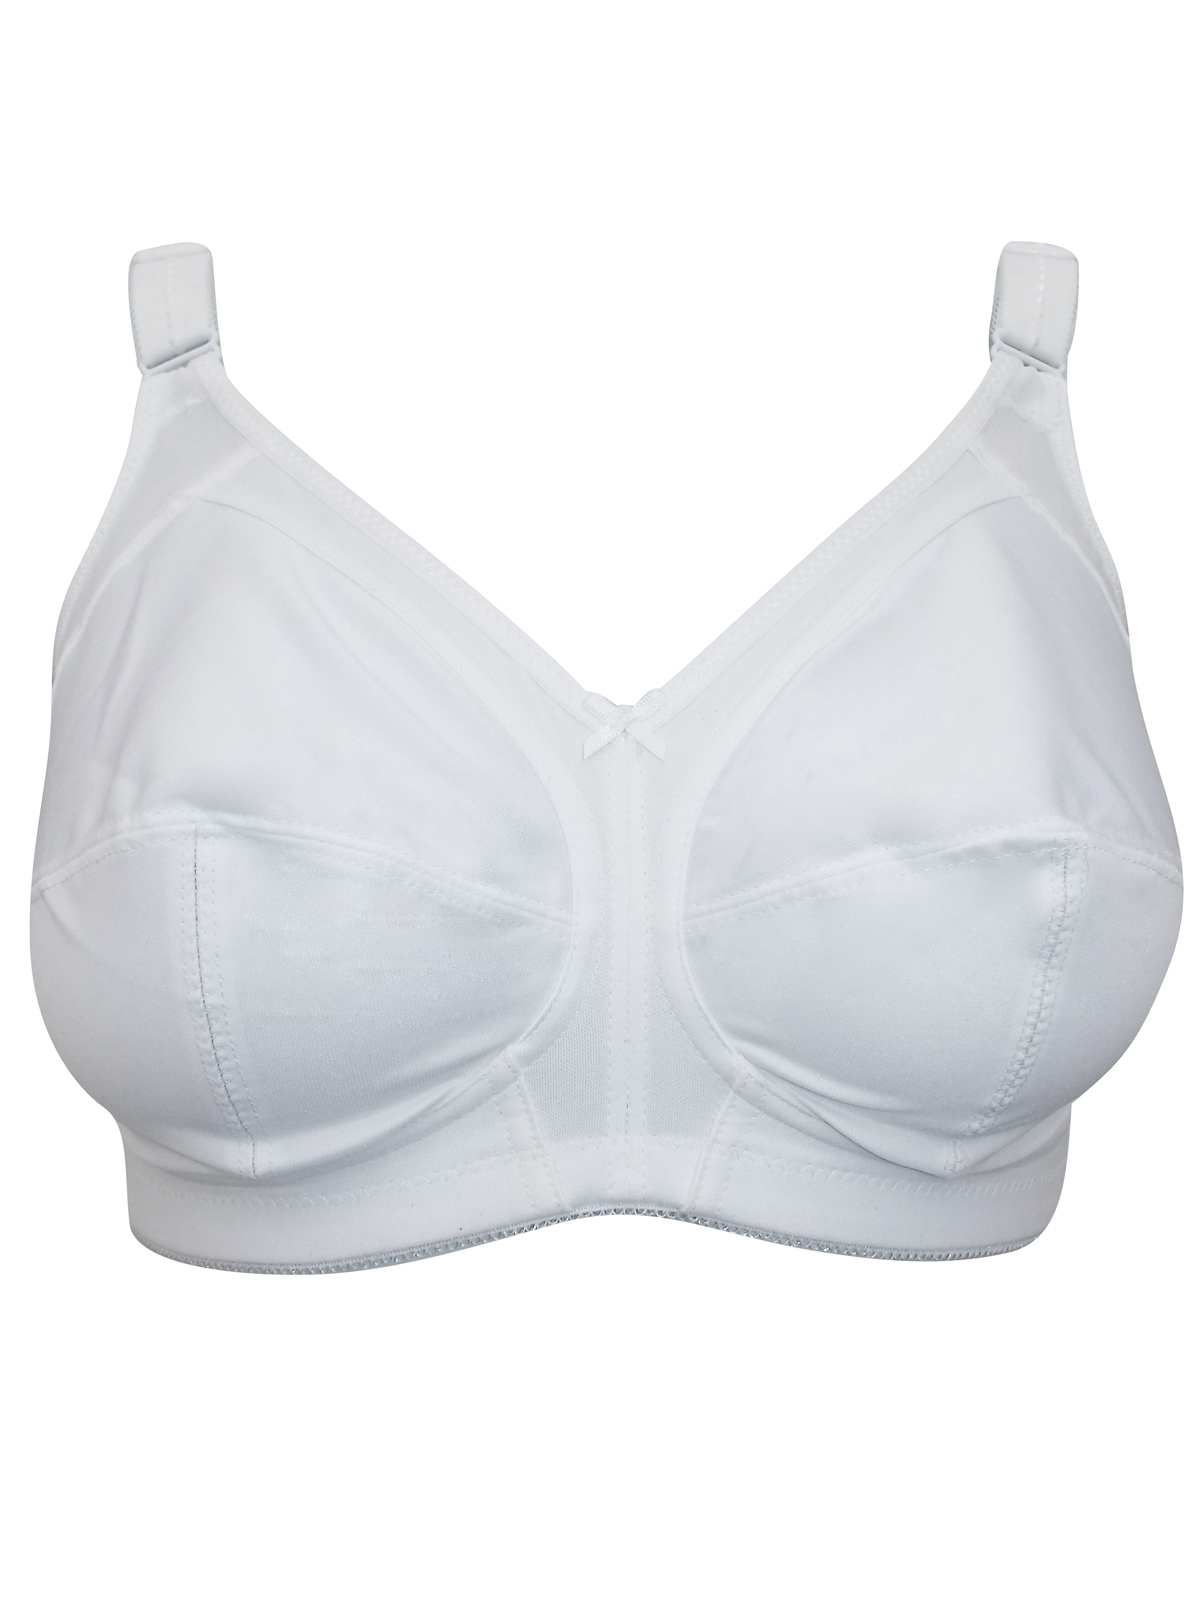 WHITE Total Support Full Cup Bra - Size 34 to 38 (C-D)